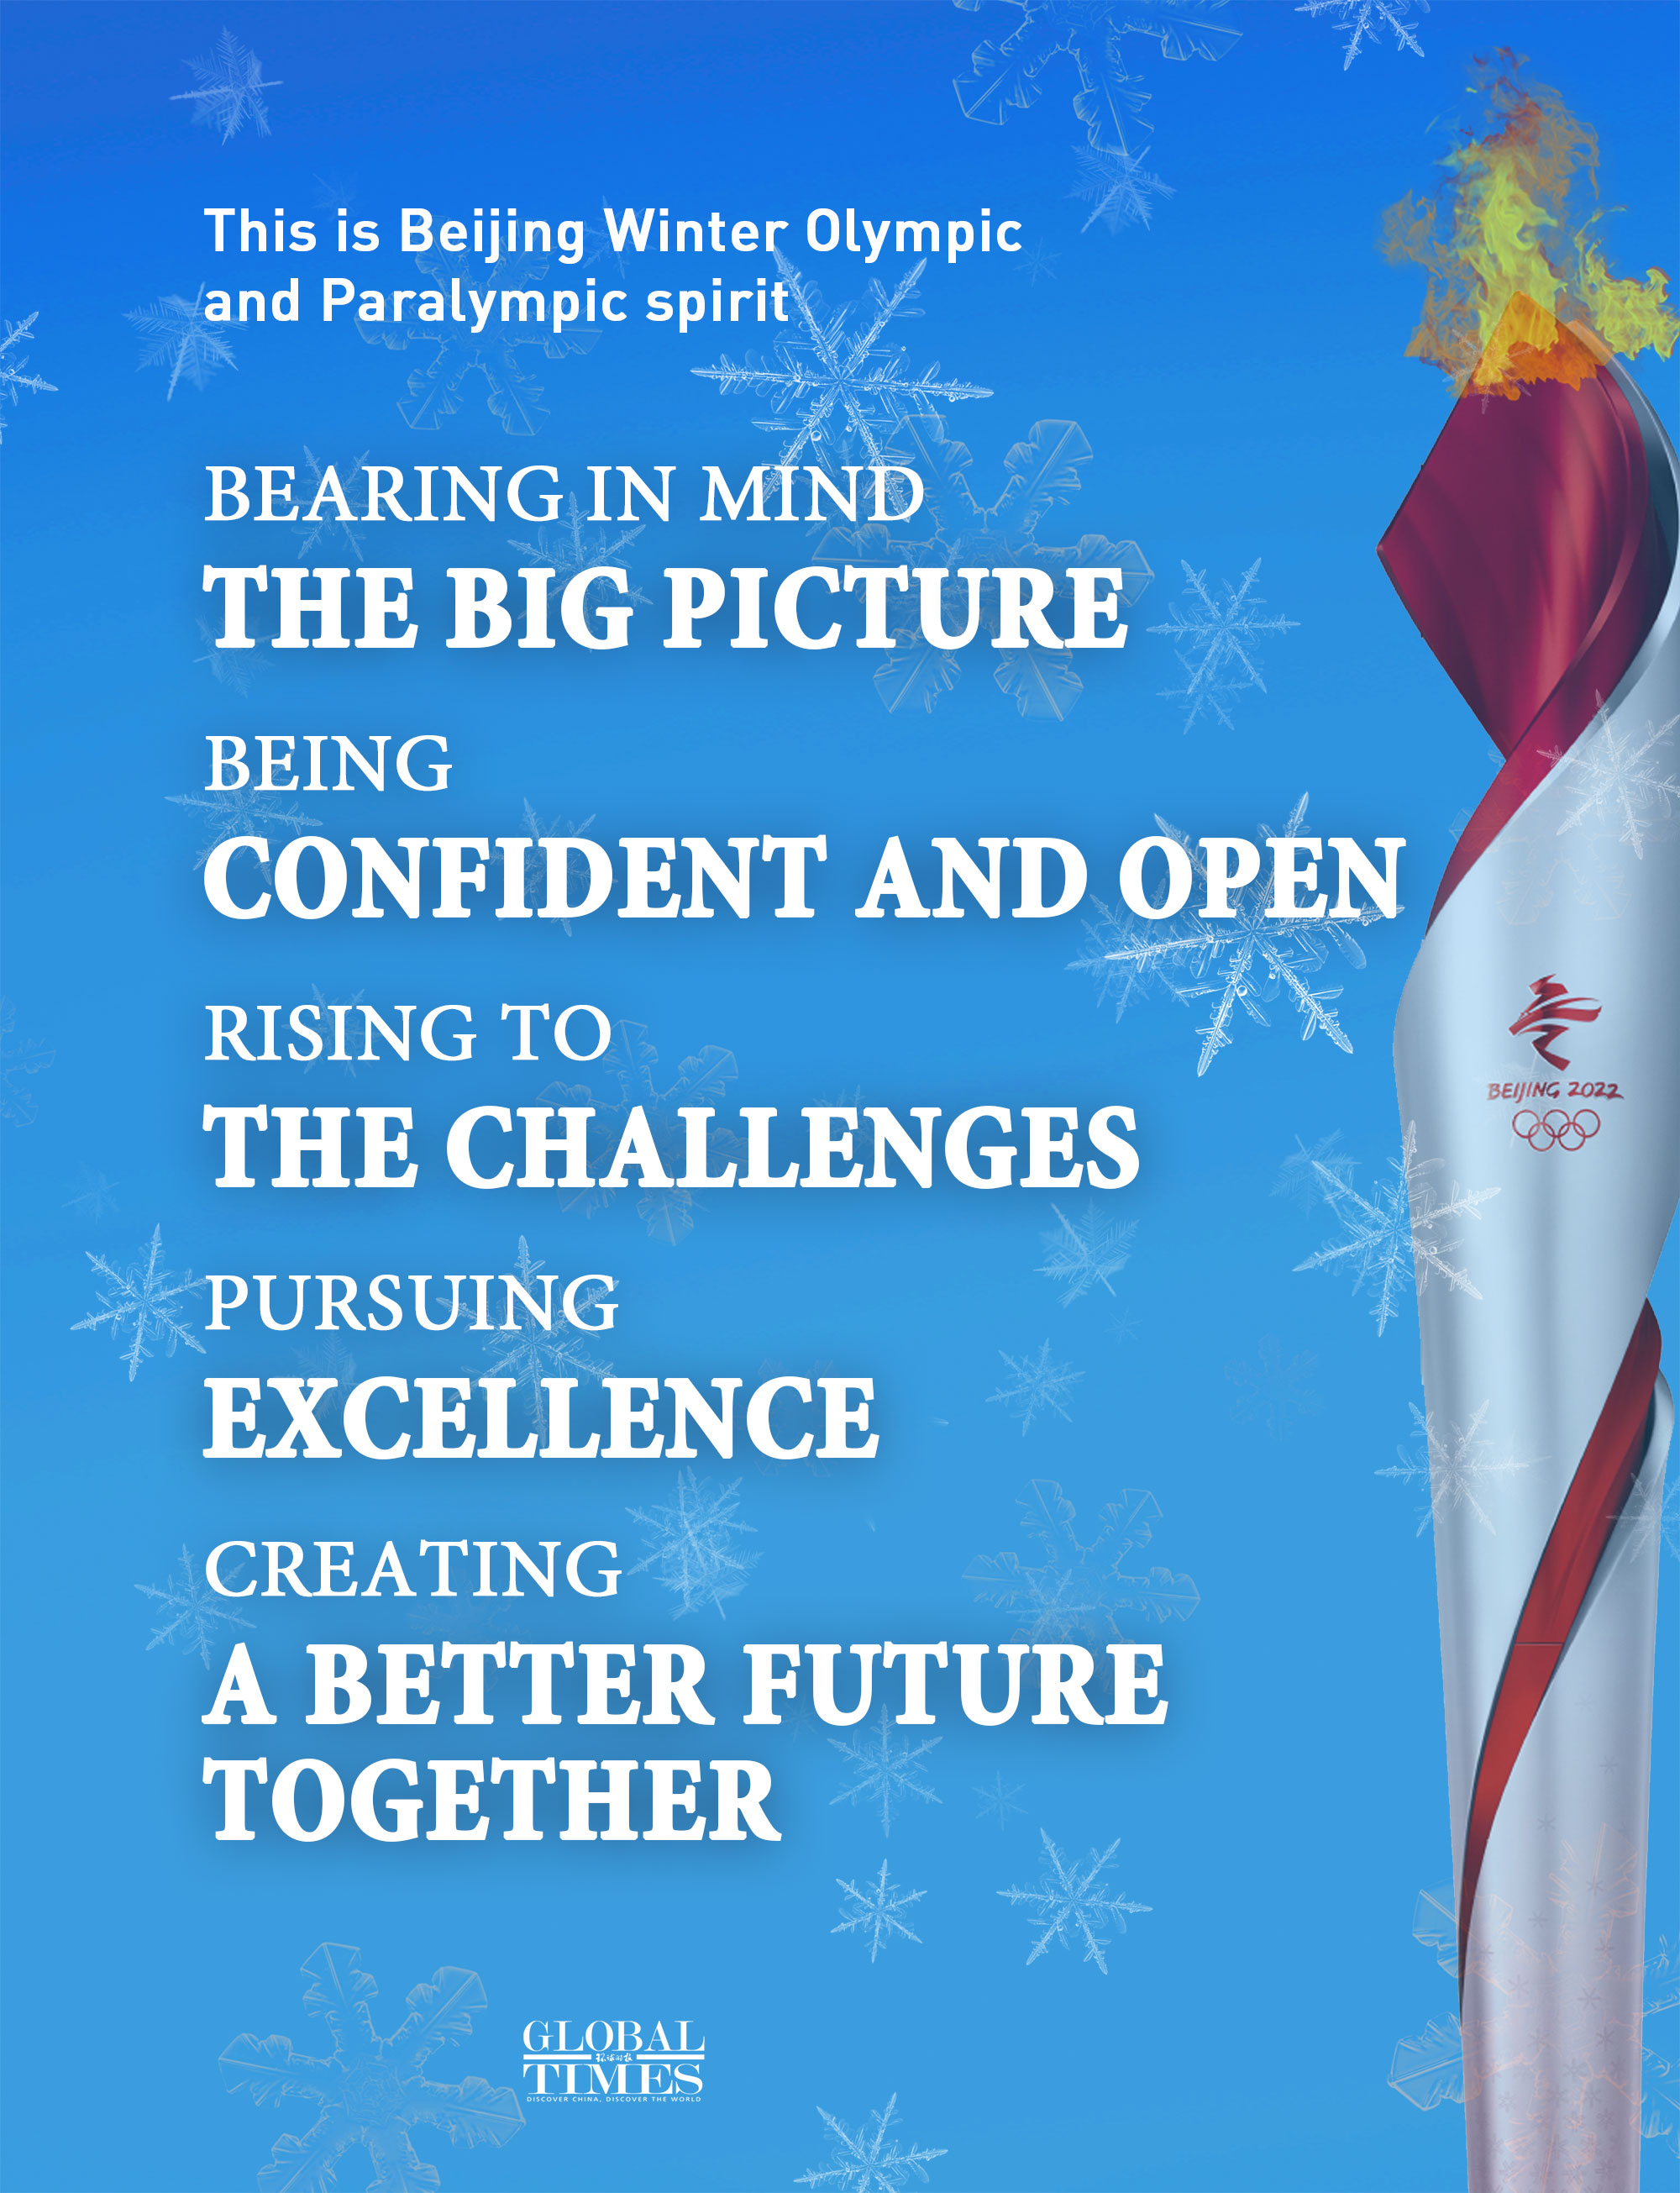 This is Beijing Winter Olympic and Paralympic spirit